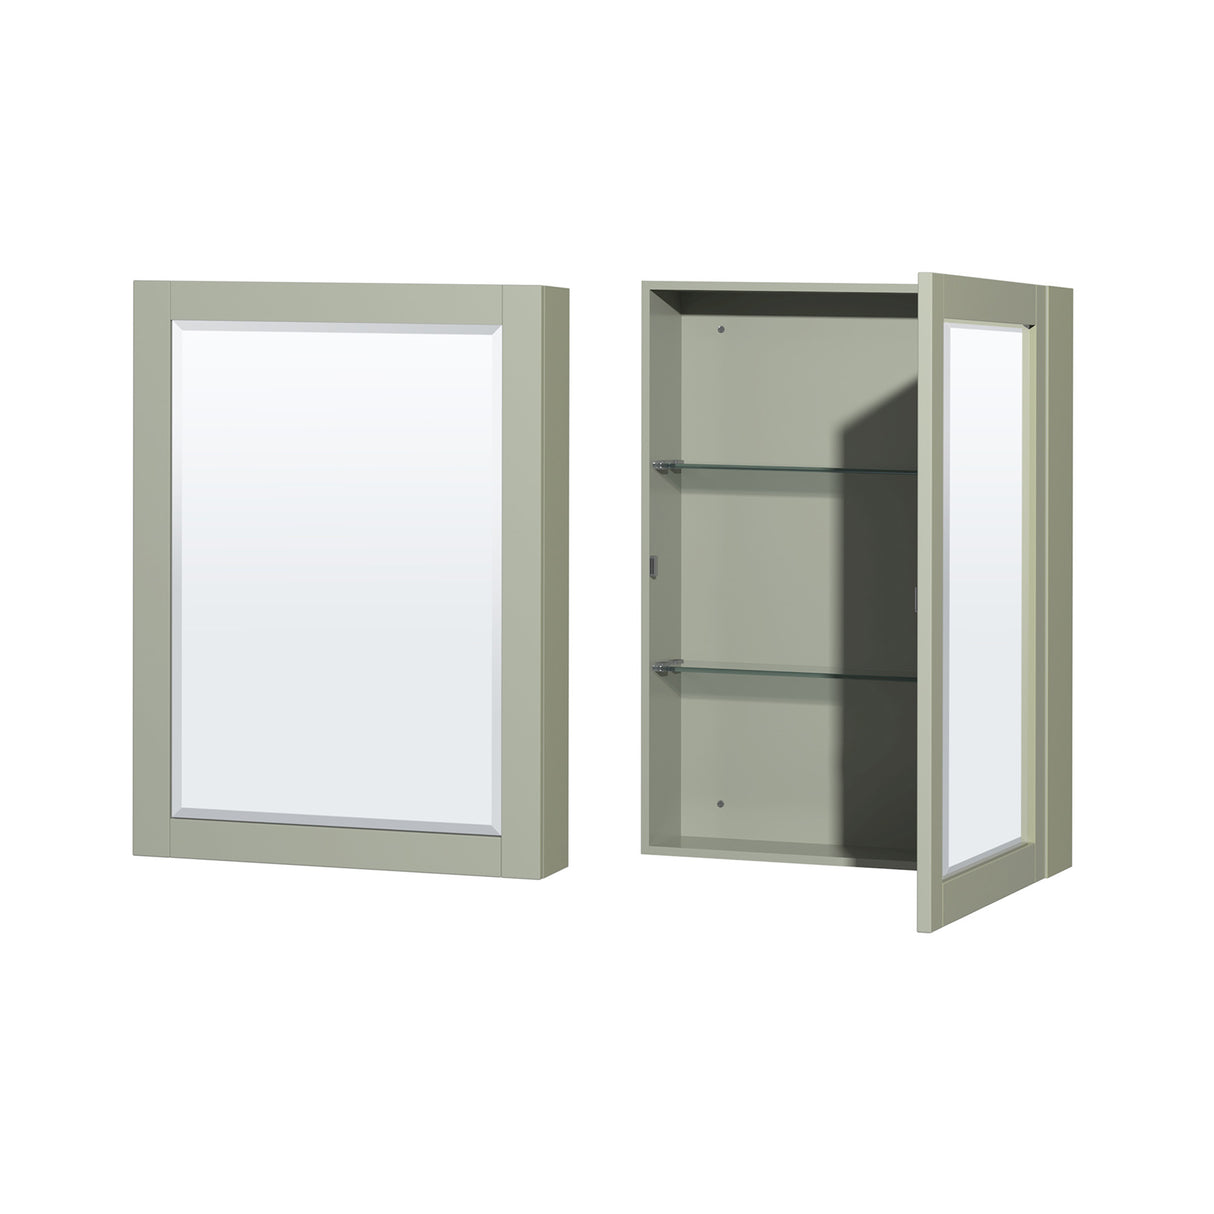 Sheffield 60 inch Double Bathroom Vanity in Light Green White Carrara Marble Countertop Undermount Square Sinks Brushed Nickel Trim Medicine Cabinets